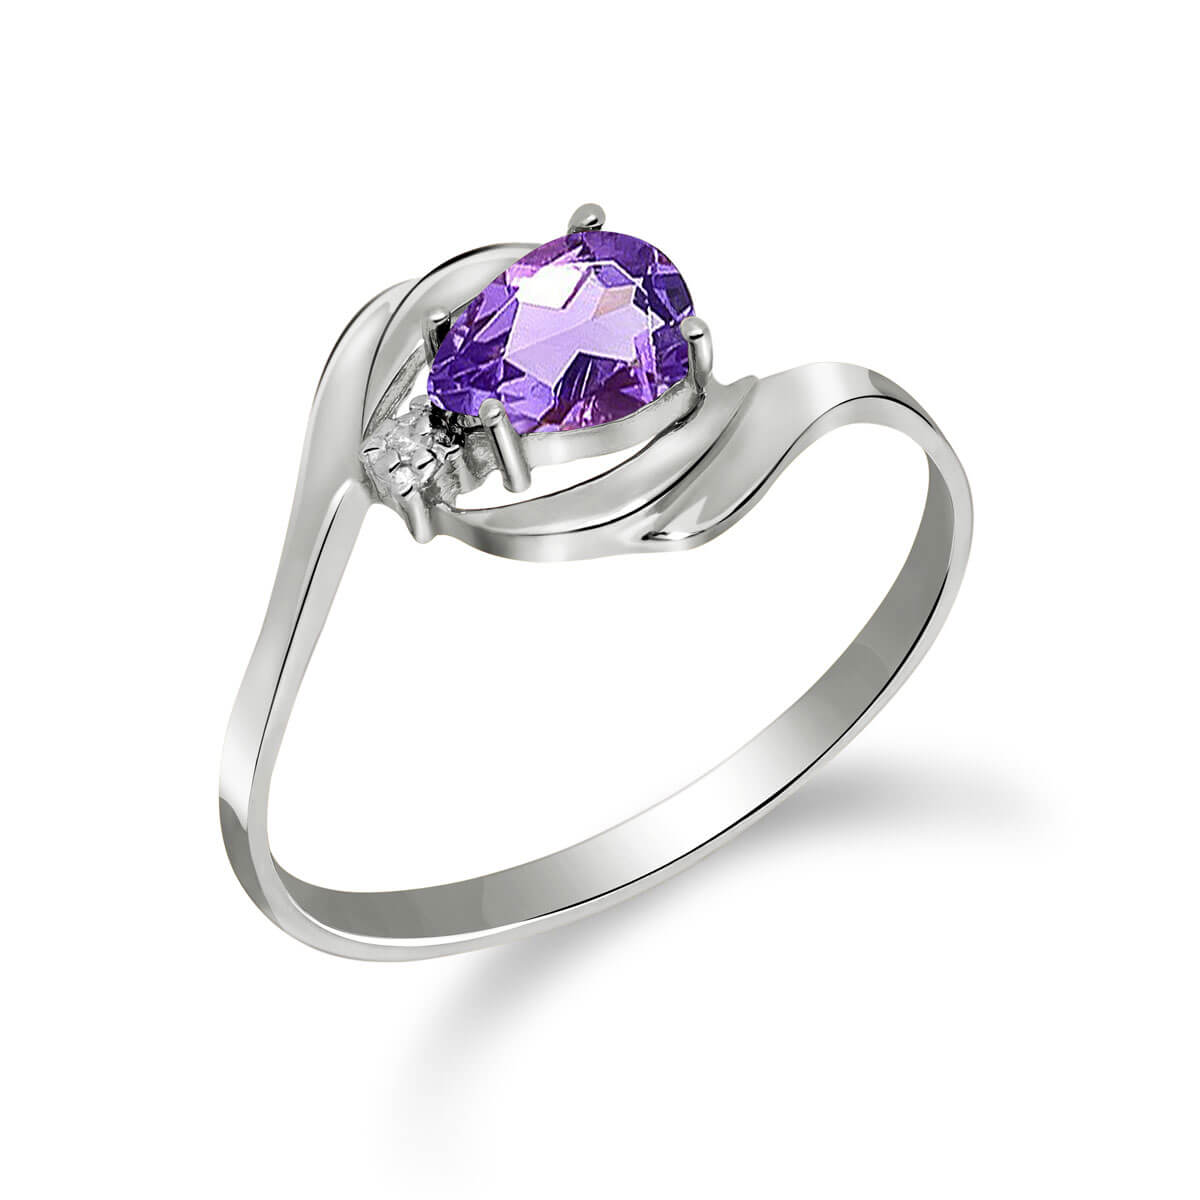 Amethyst & Diamond Flare Ring in 9ct White Gold